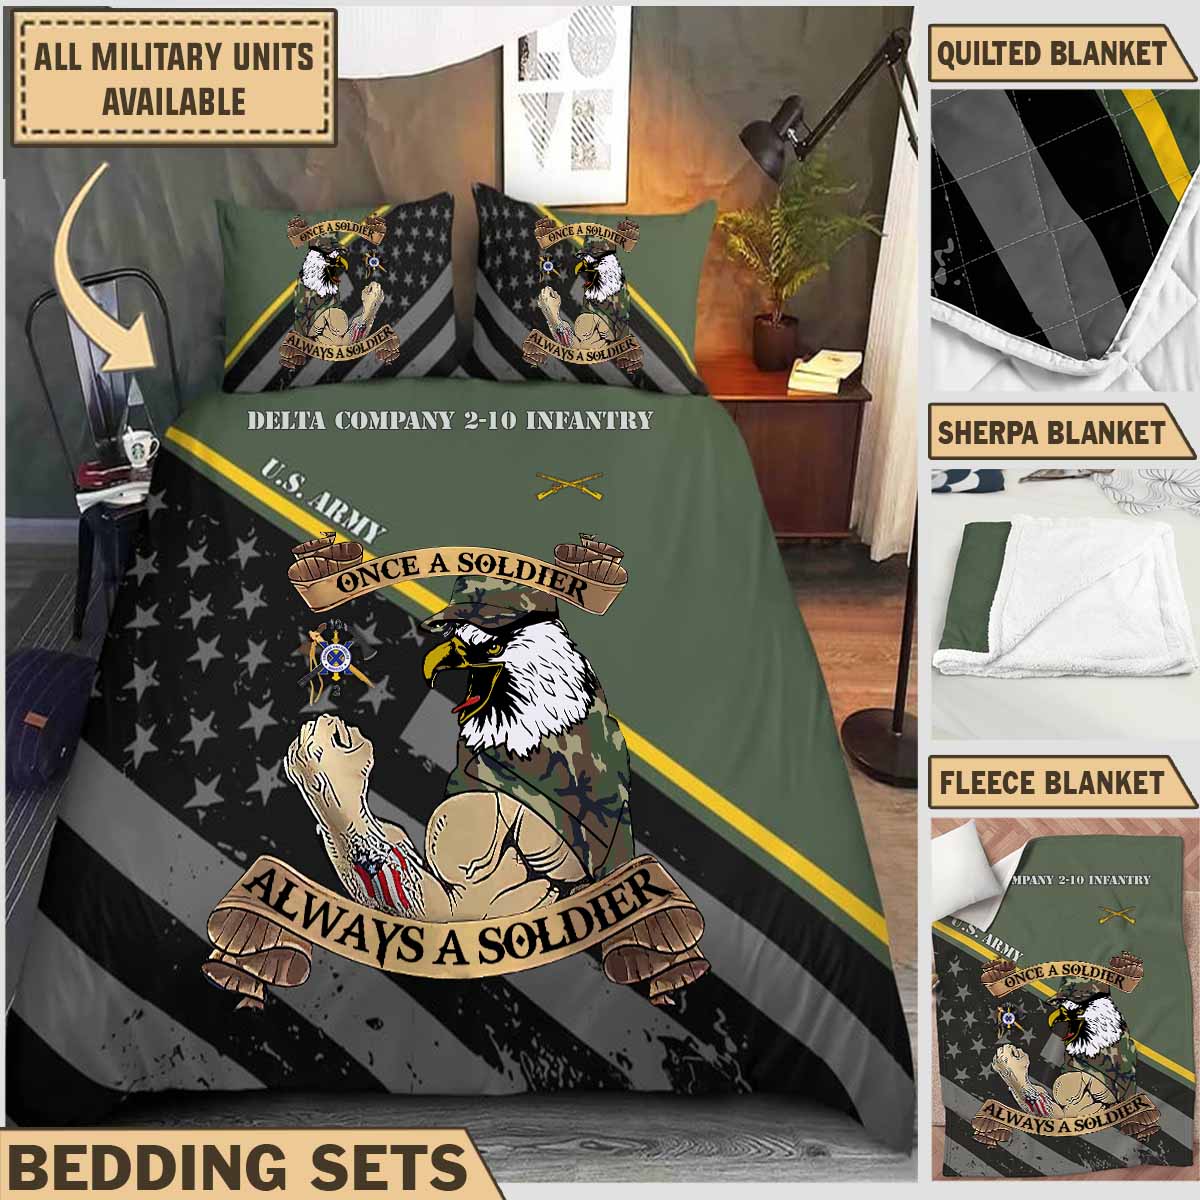 delta company 2 10 infantrybedding collection cwb6j